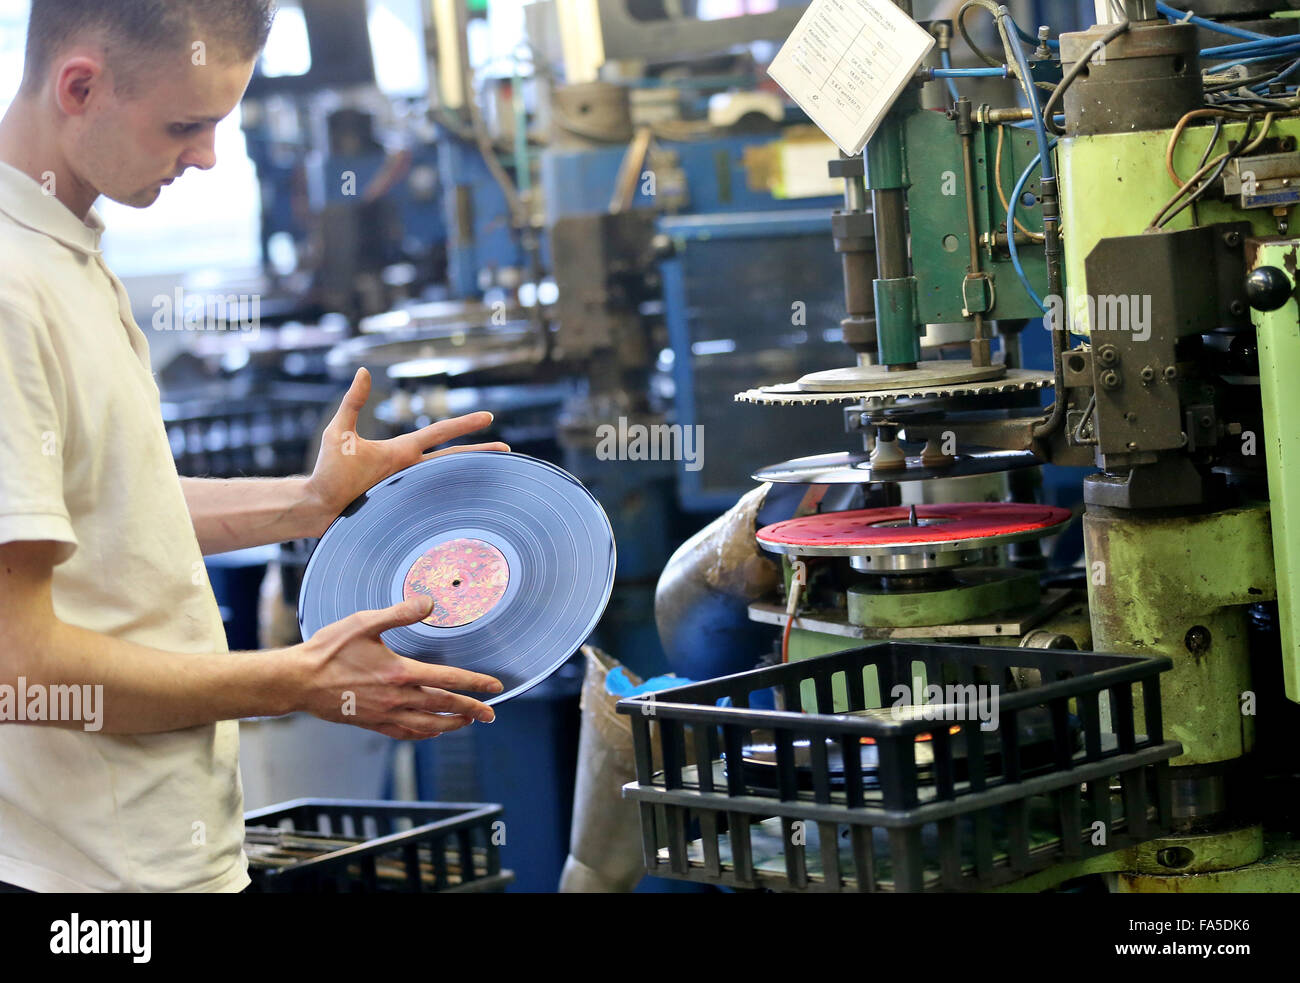 Stollberg, Germany. 3rd Dec, 2015. An employee of Celebrate Records checks a freshly pressed record at the pressing plant in Stollberg, Germany, 3 December 2015. According to the Bundesverband Musikindustrie (music industry association), the LP record has been making a comeback for several years. In 2014 around 1.8 million records worth 38 million euros were sold, the most since 1992. At Celebrate Records, around 40 employees produce more than 2 million records each year. Around 70 per cent are exported. PHOTO: JAN WOITAS/DPA/Alamy Live News Stock Photo